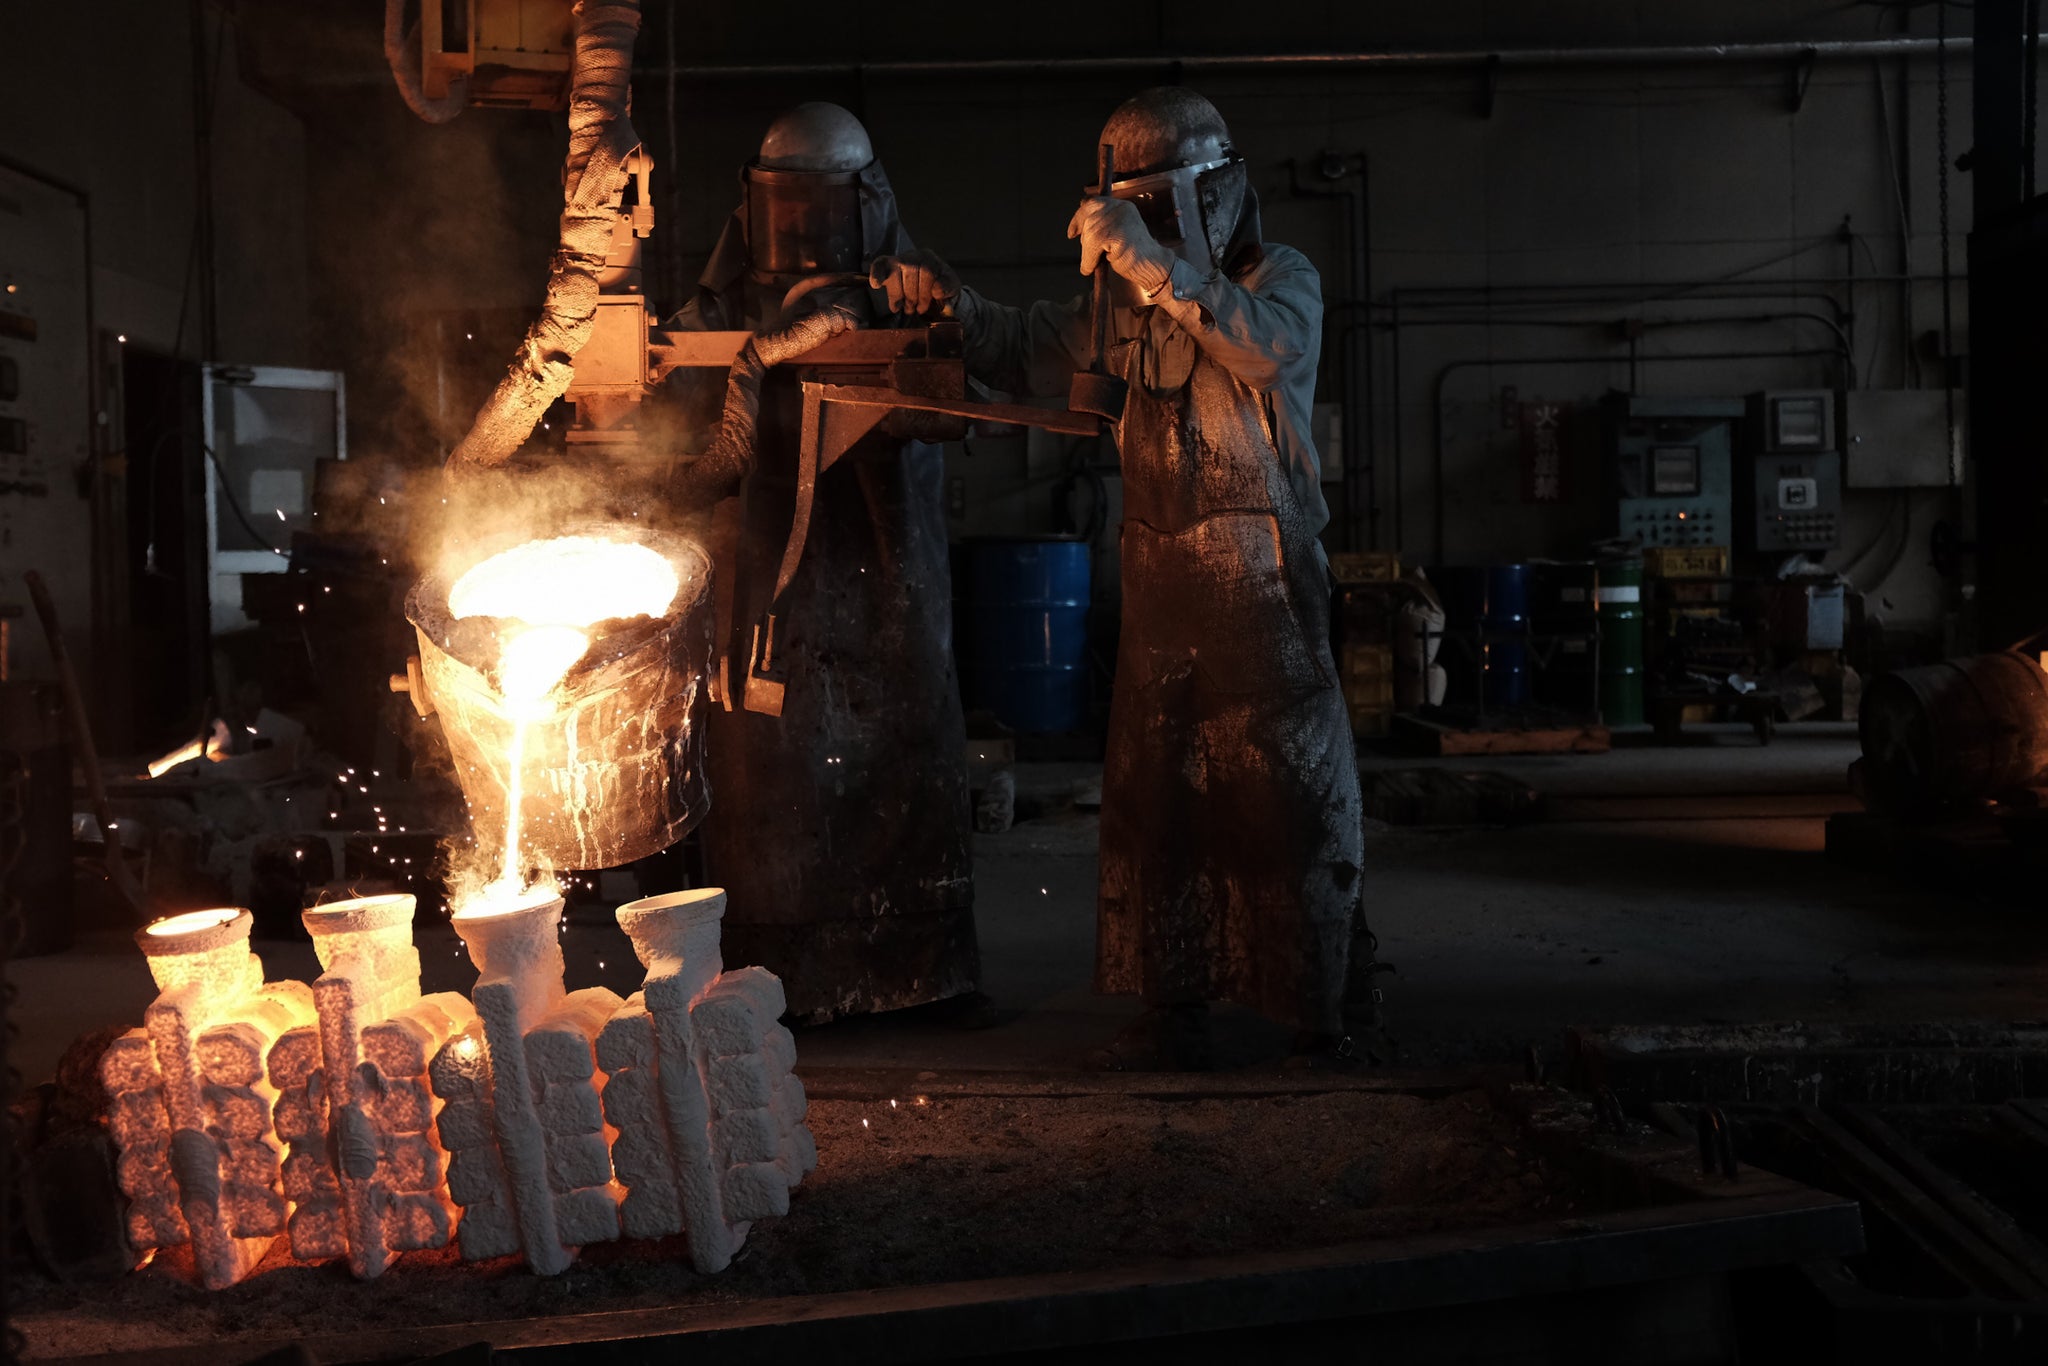 japanese lost wax casting process pouring molten metal into molds creating intricate shapes